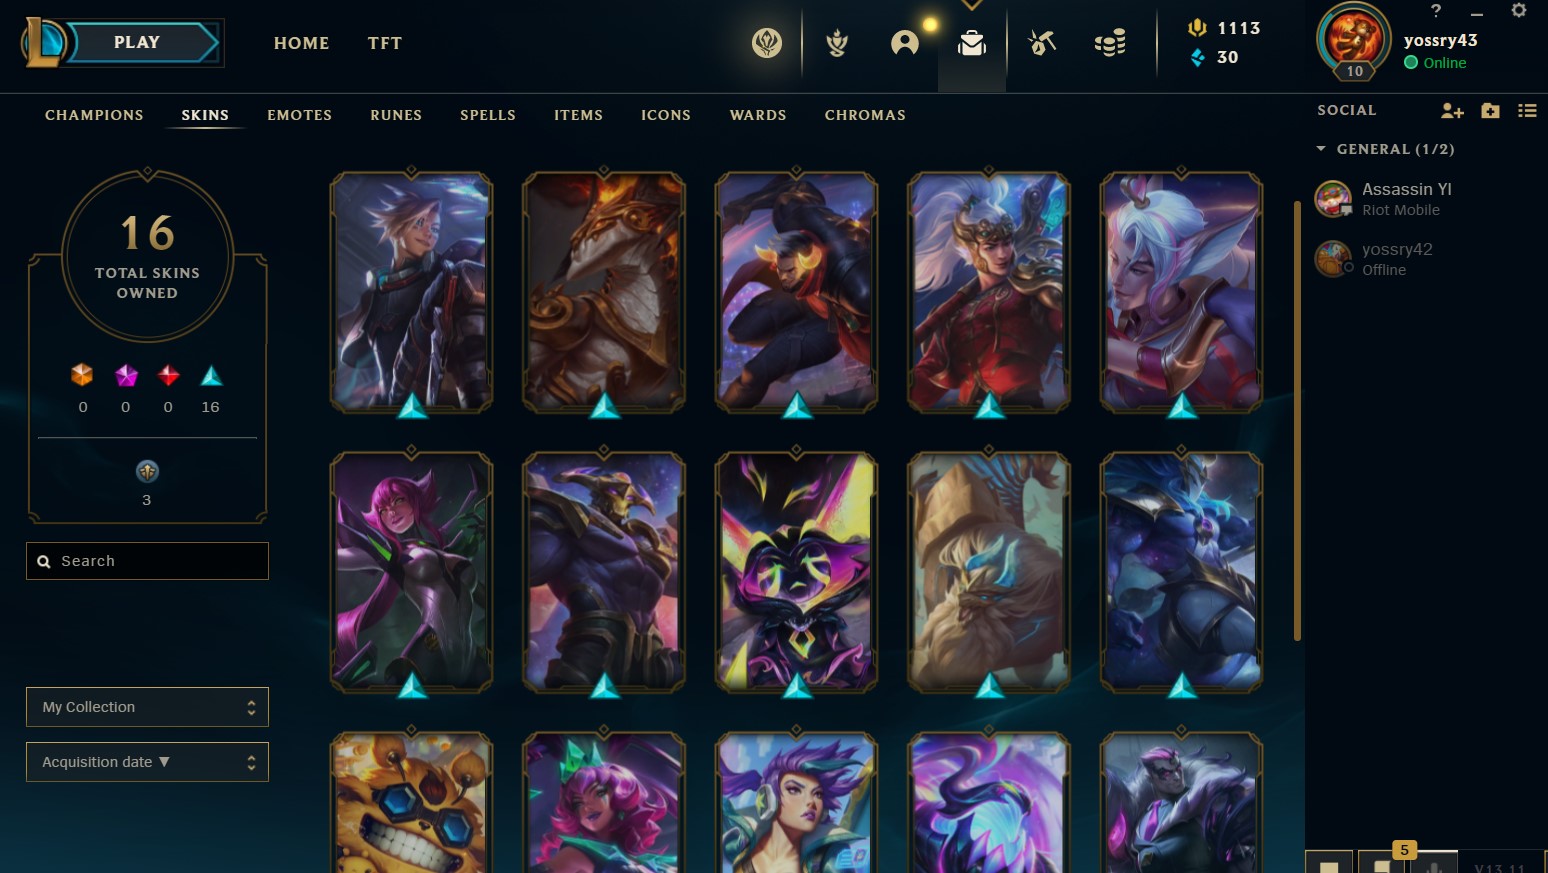 {EUW}lv10 ACCOUNT Hand leveled with (+16 epic skin +55mythic ) check Discretion